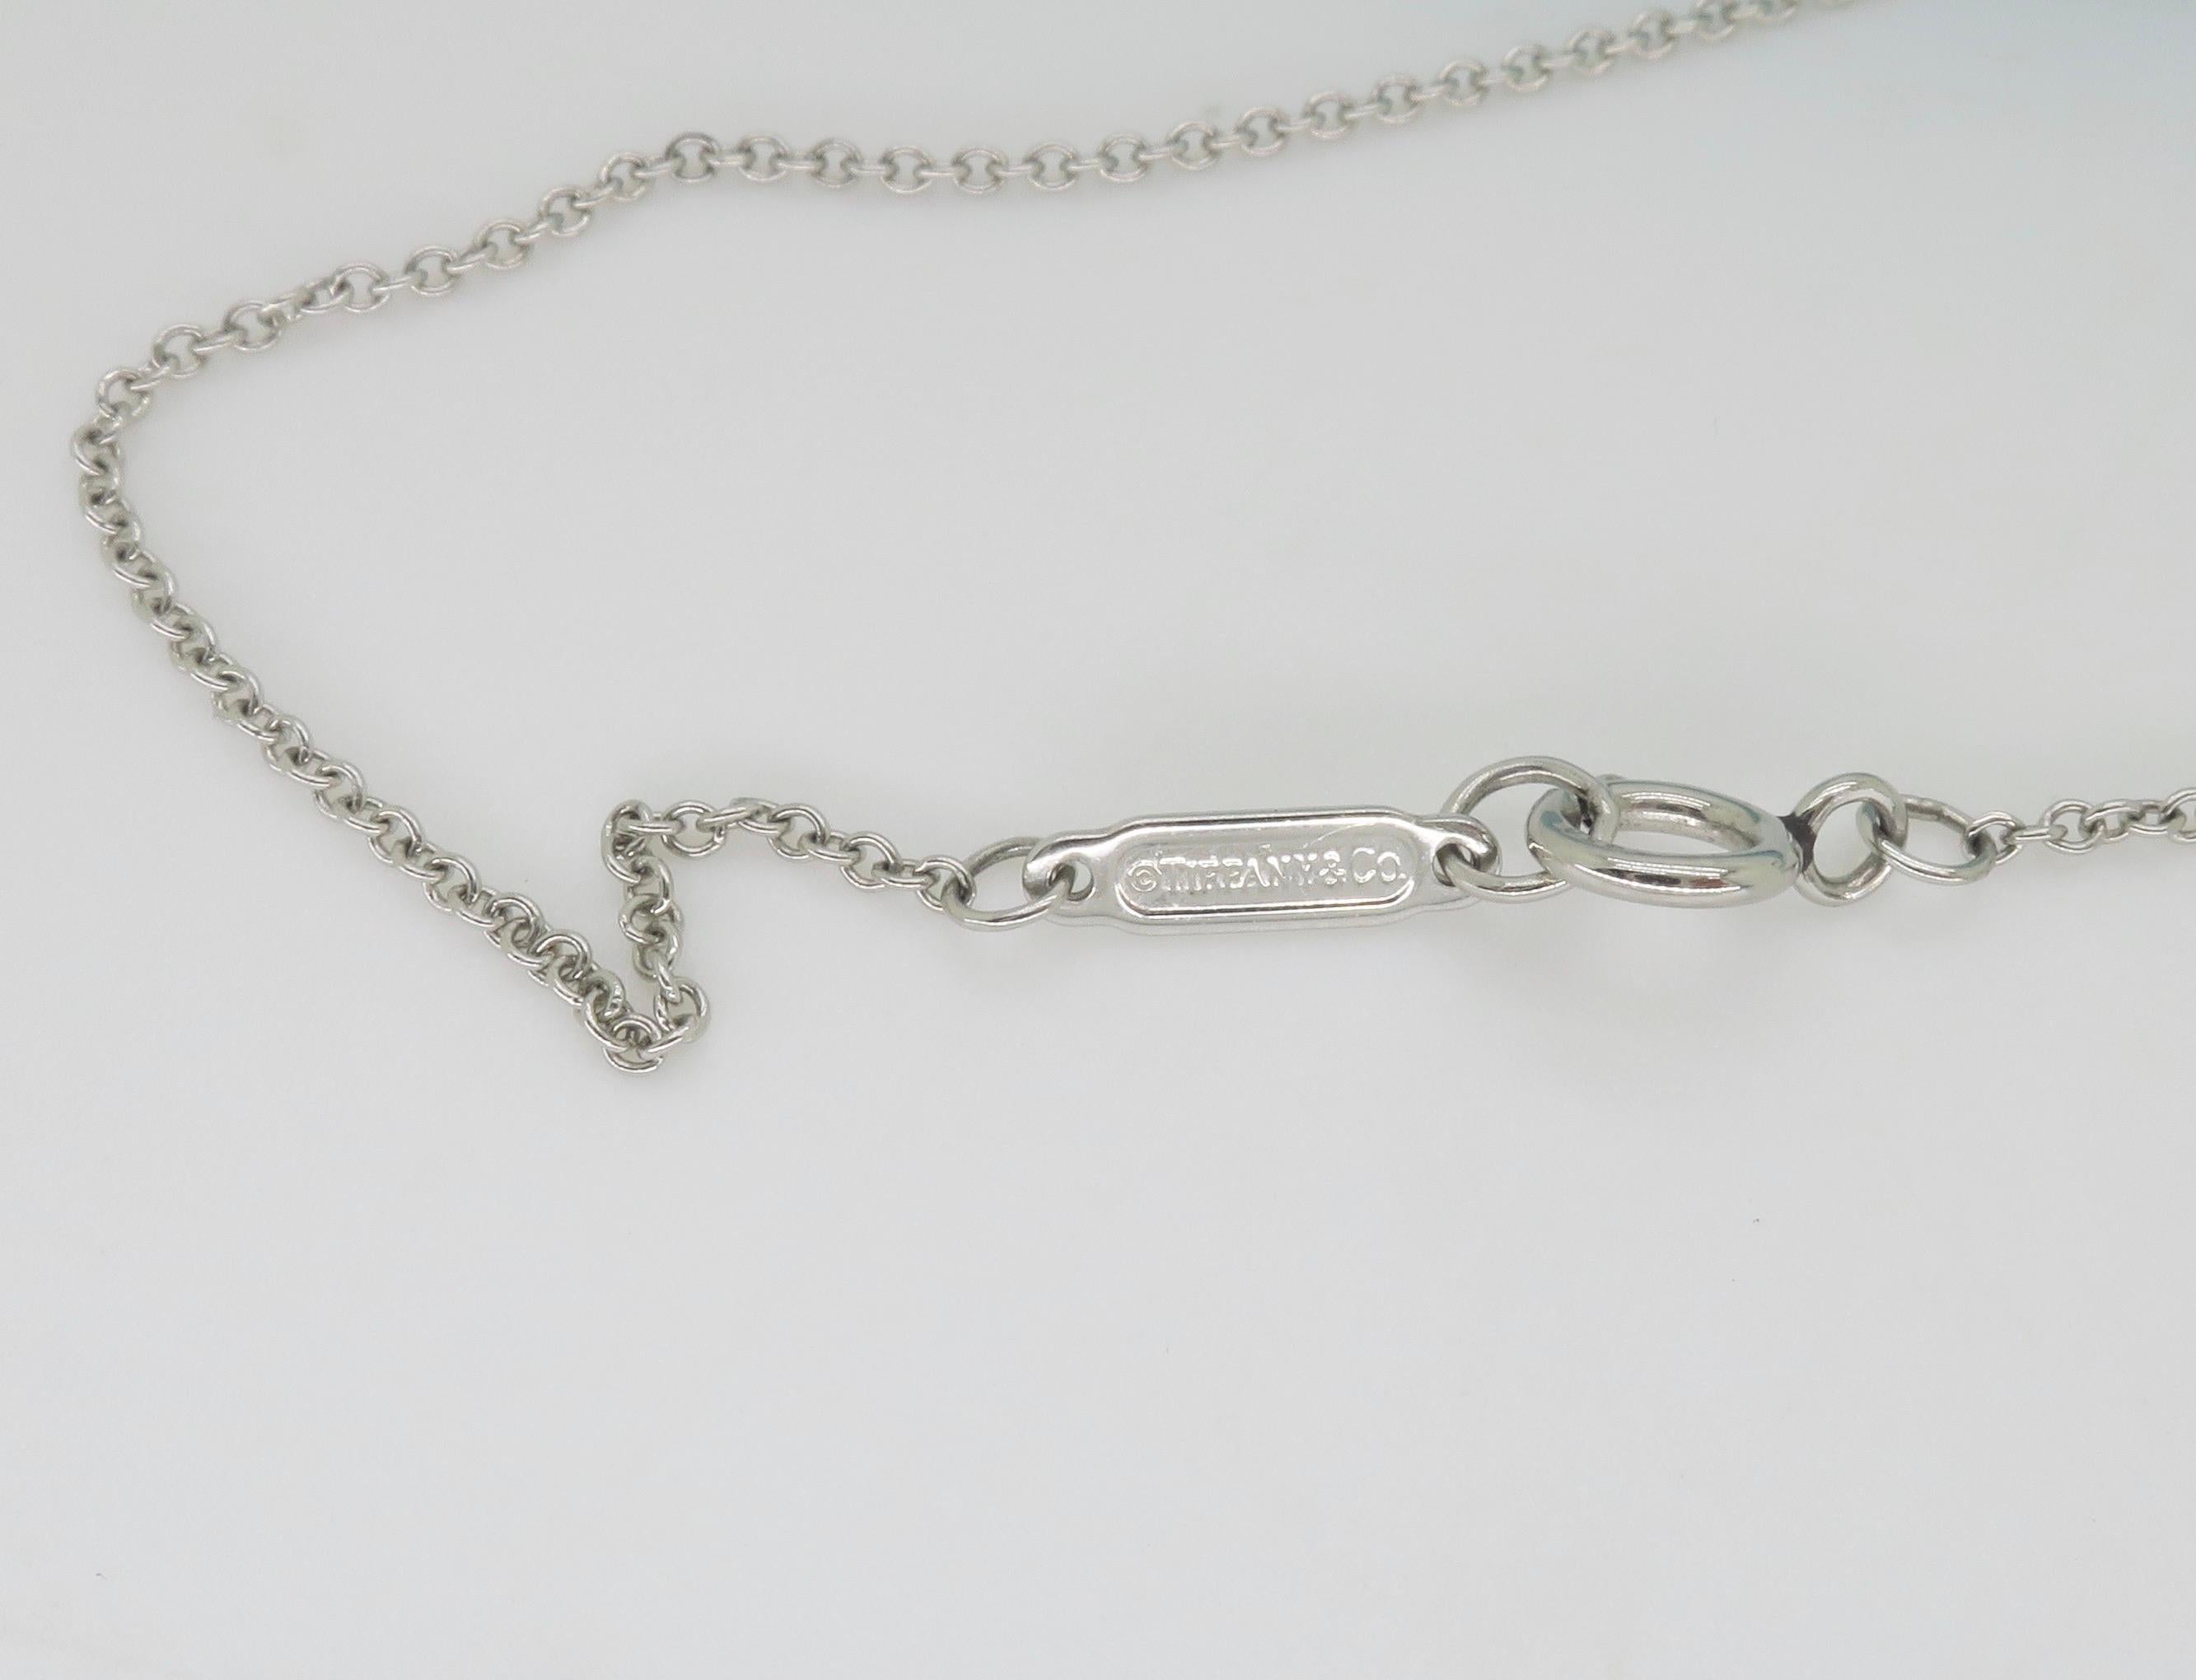 Rare Tiffany & Co. Diamond Dragonfly Necklace made in Platinum  1